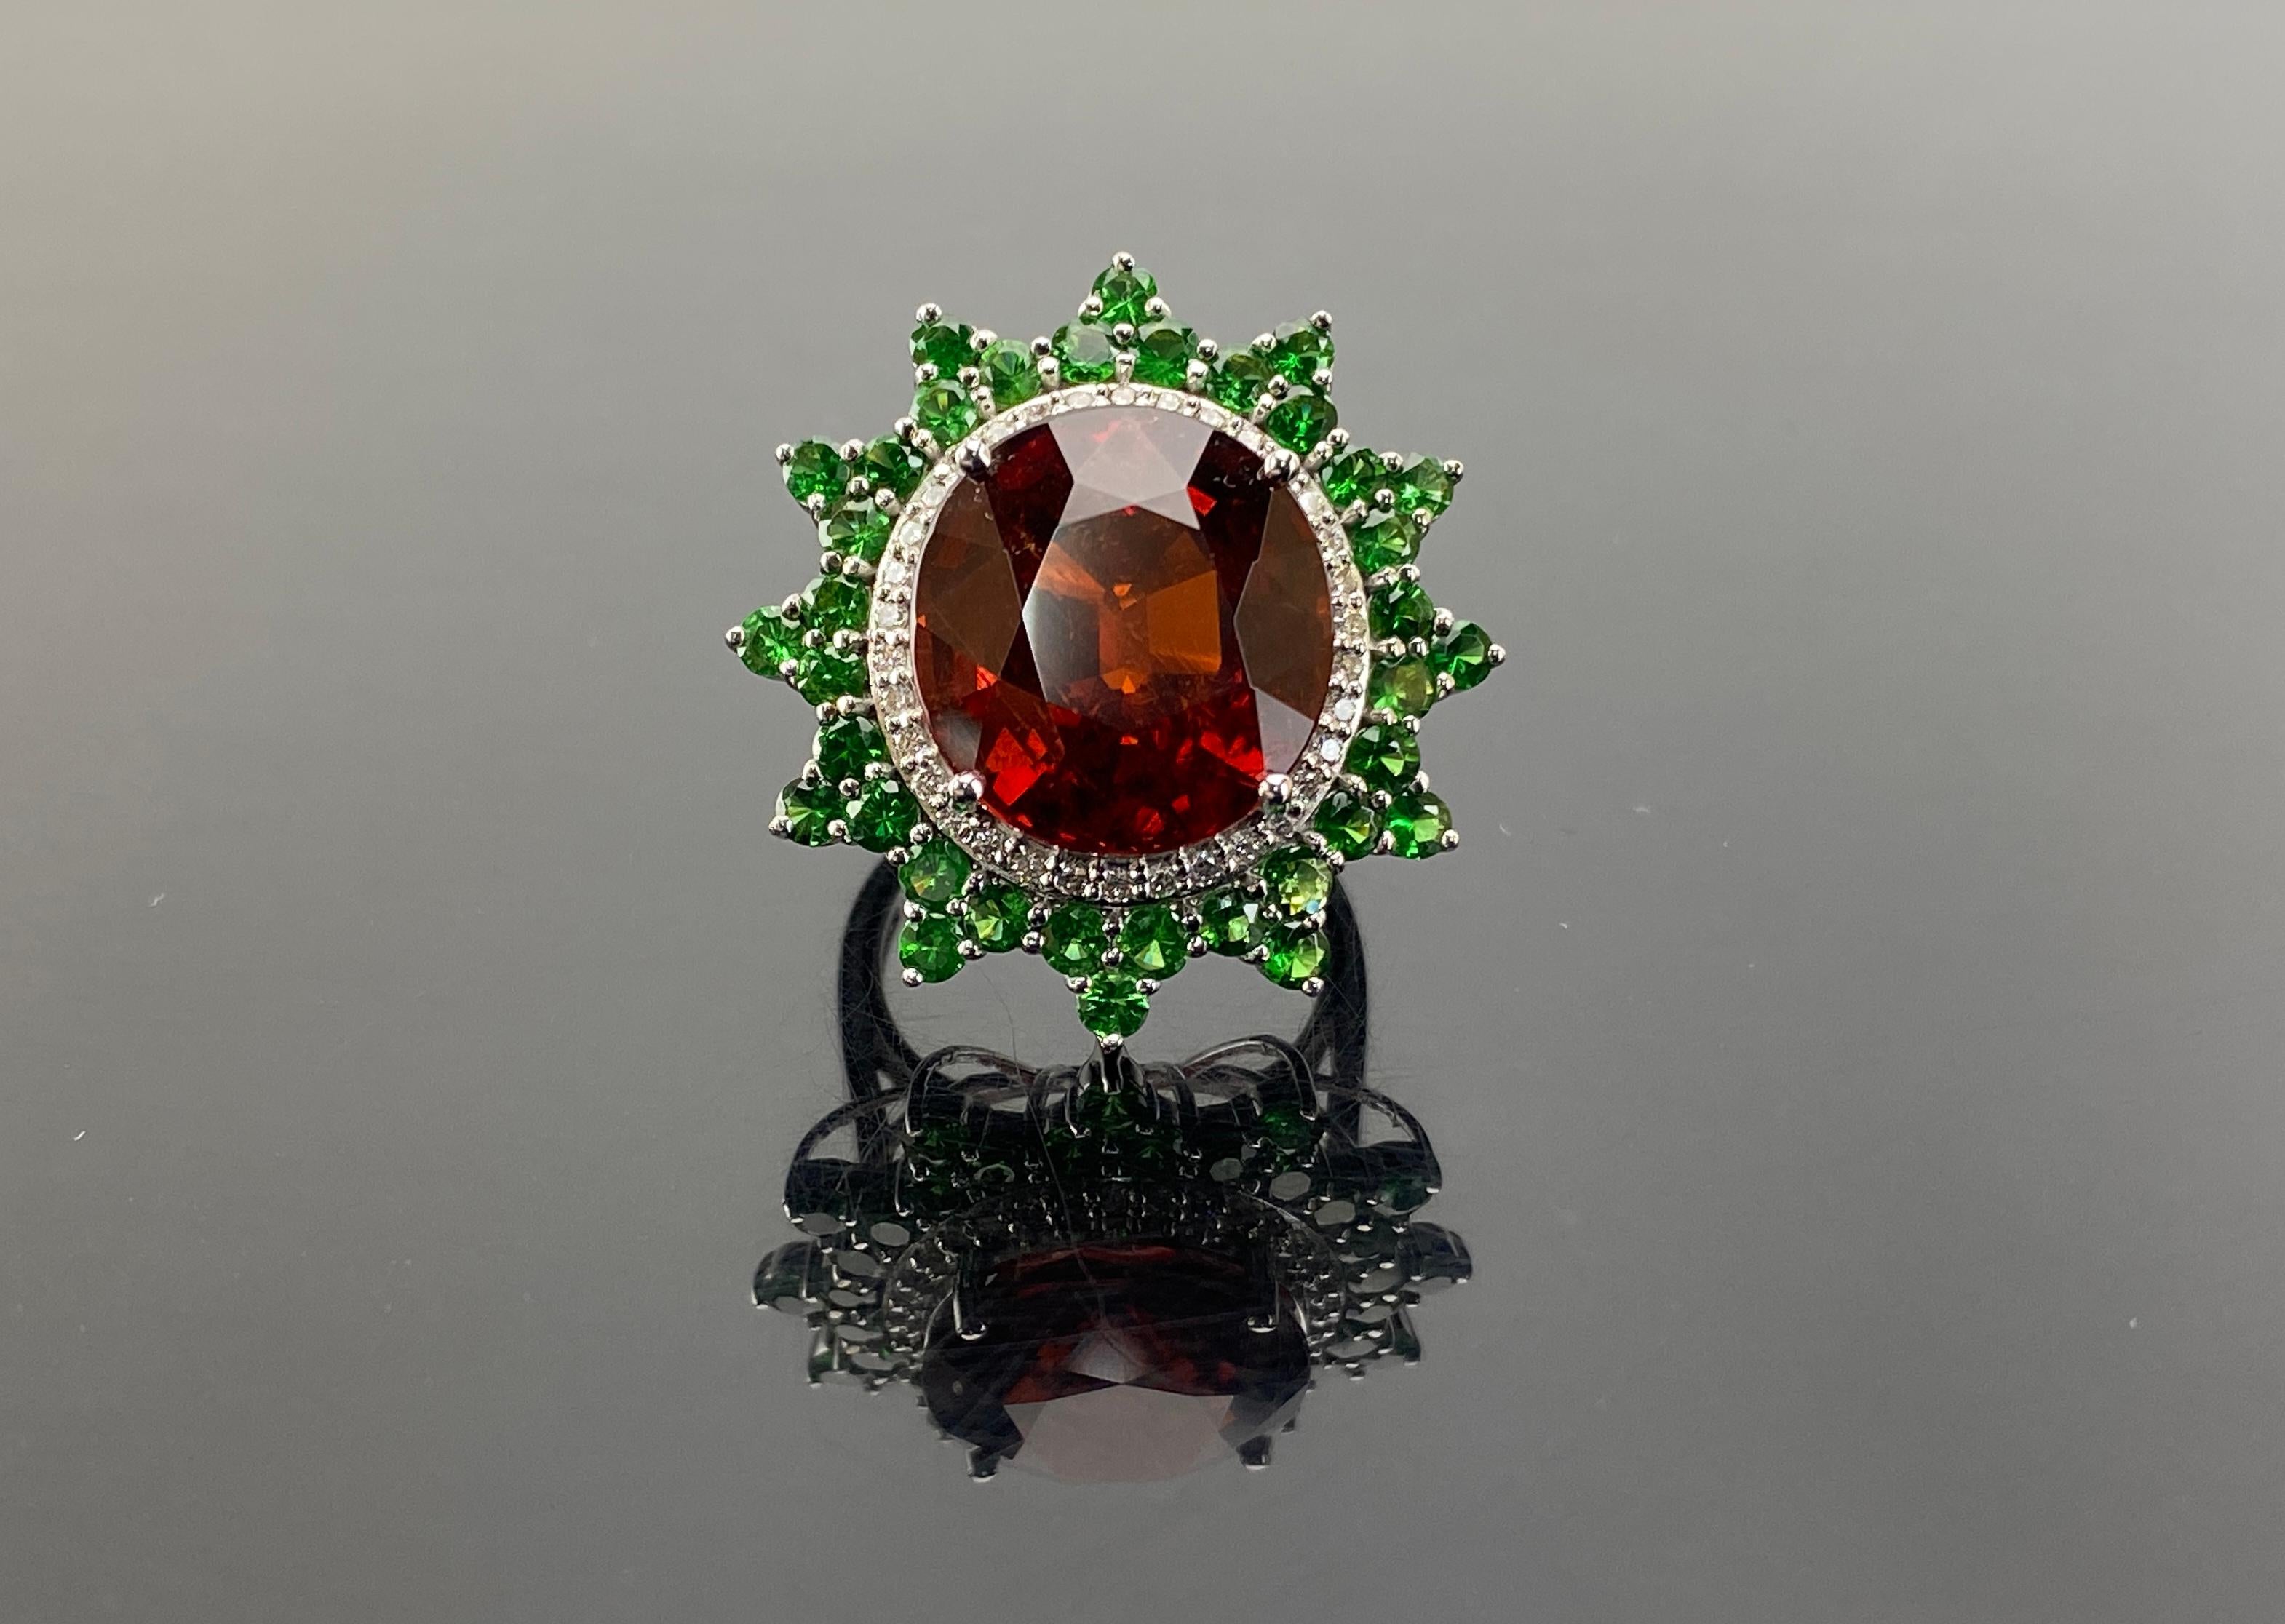 An exceptional 18.53 carat, transparent and fiery orange color Mandarin Garnet center stone accented with uniquely cut round Tsavorites totaling 6.13 ct. The ring is also set with 0.34 carat White Diamonds, G-H color and VVS1 clarity, all set in